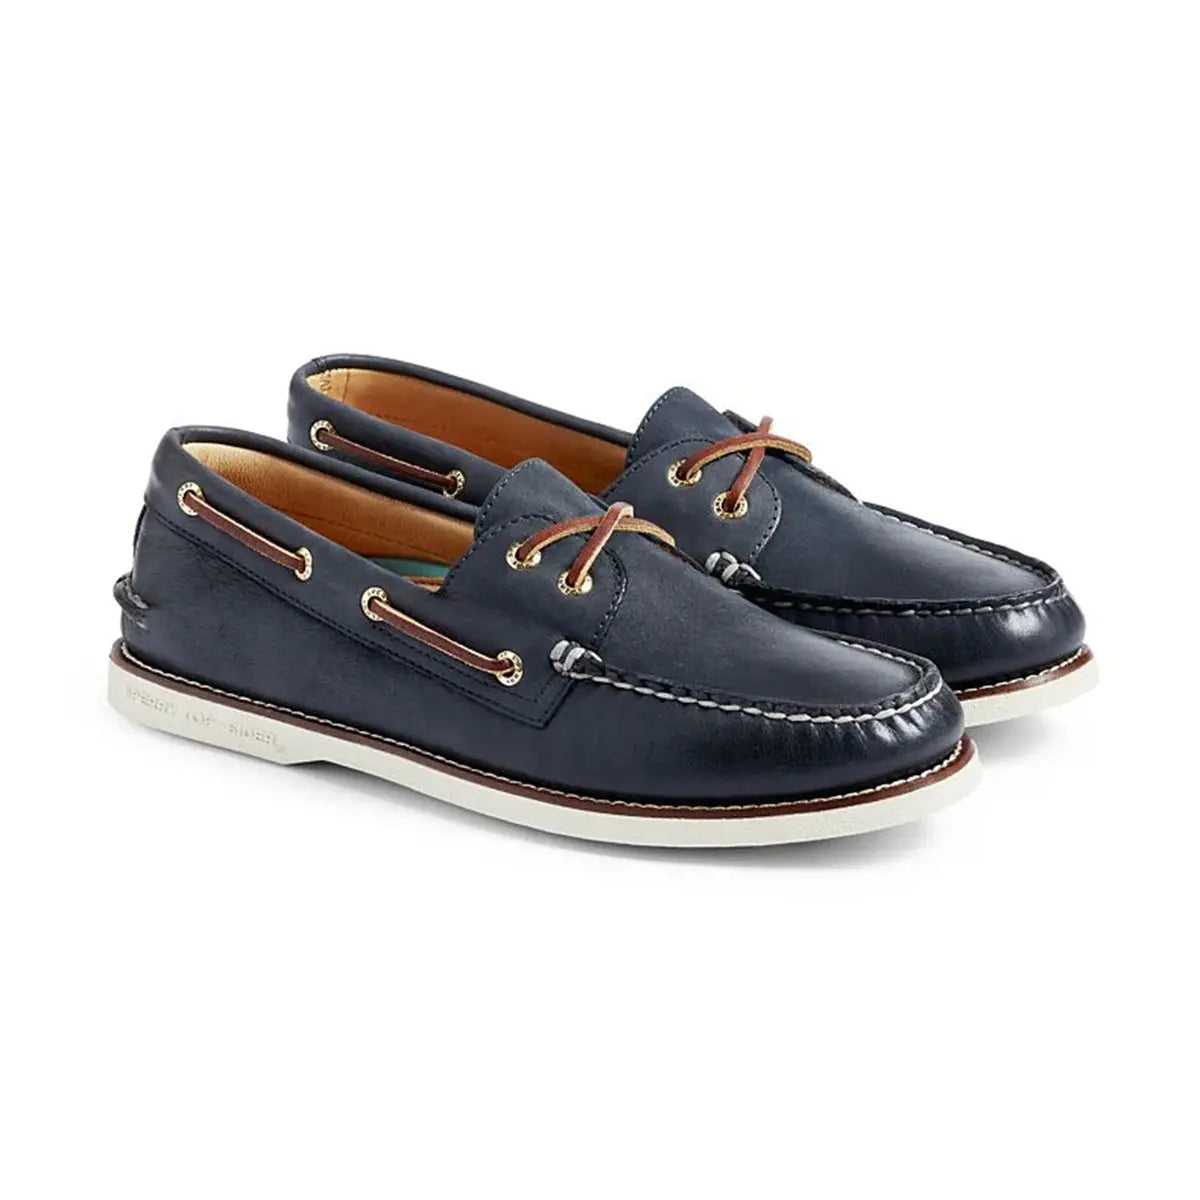 Navy Gold Cup Authentic Original Boat Shoe Sperry